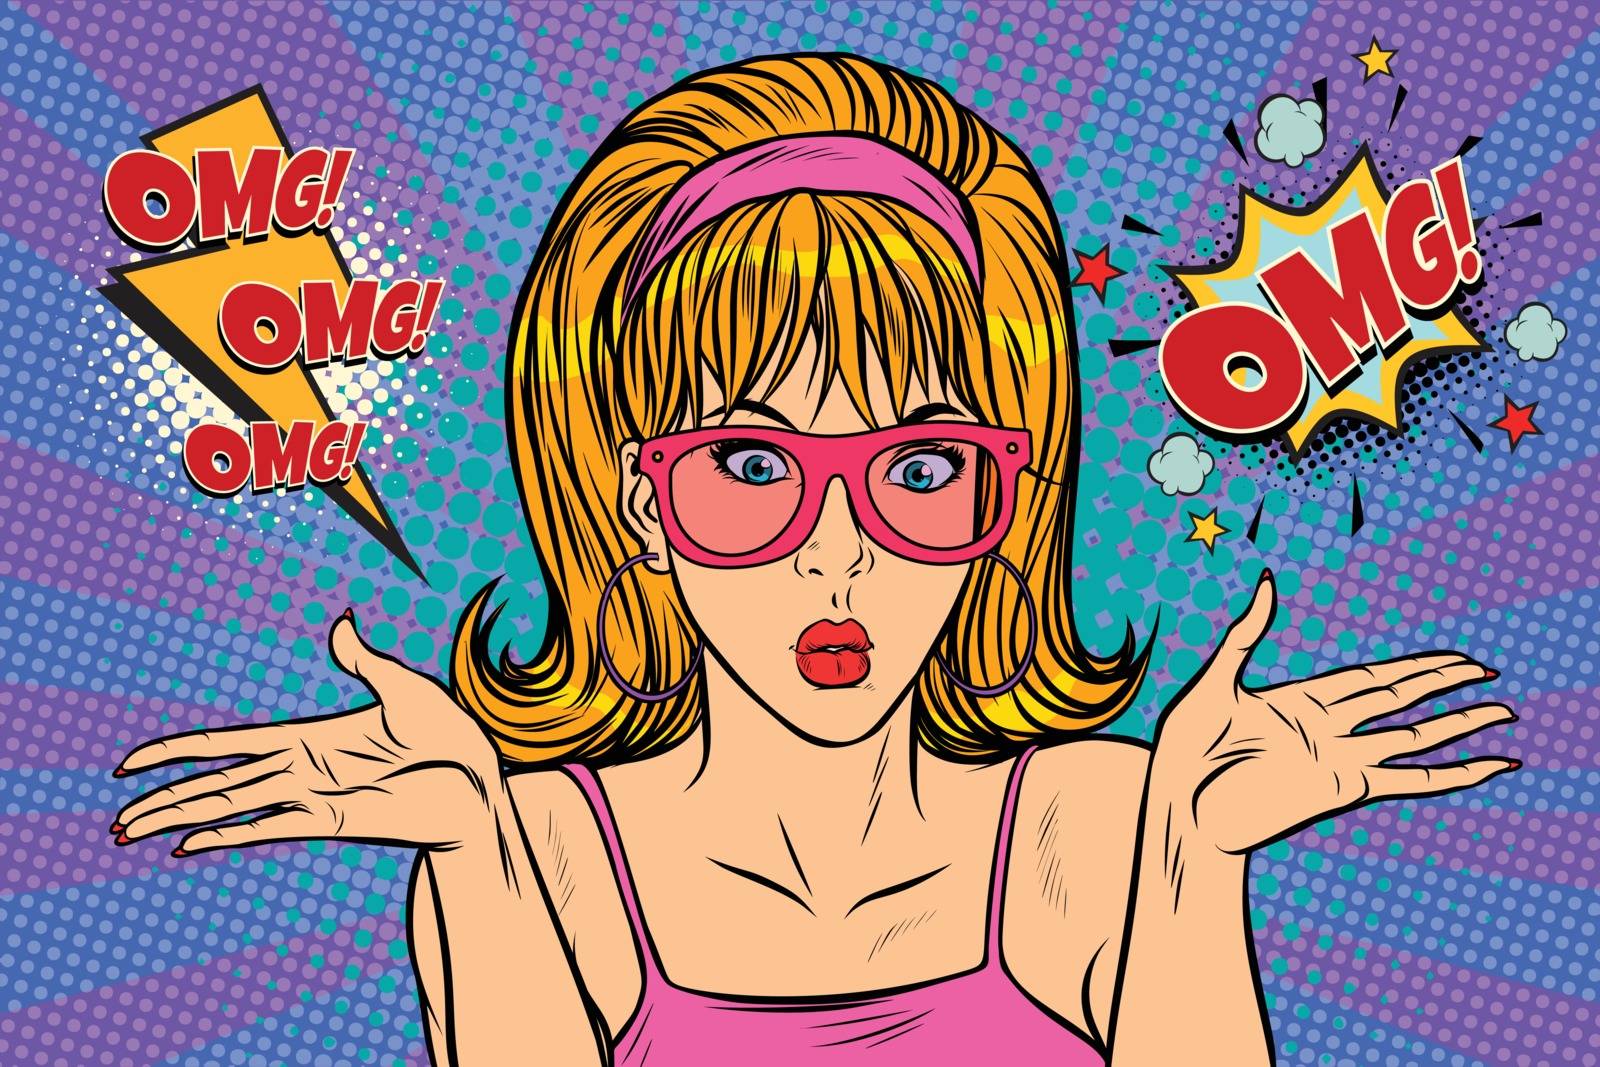 Confusion OMG glamour woman with glasses. Pop art retro vector illustration